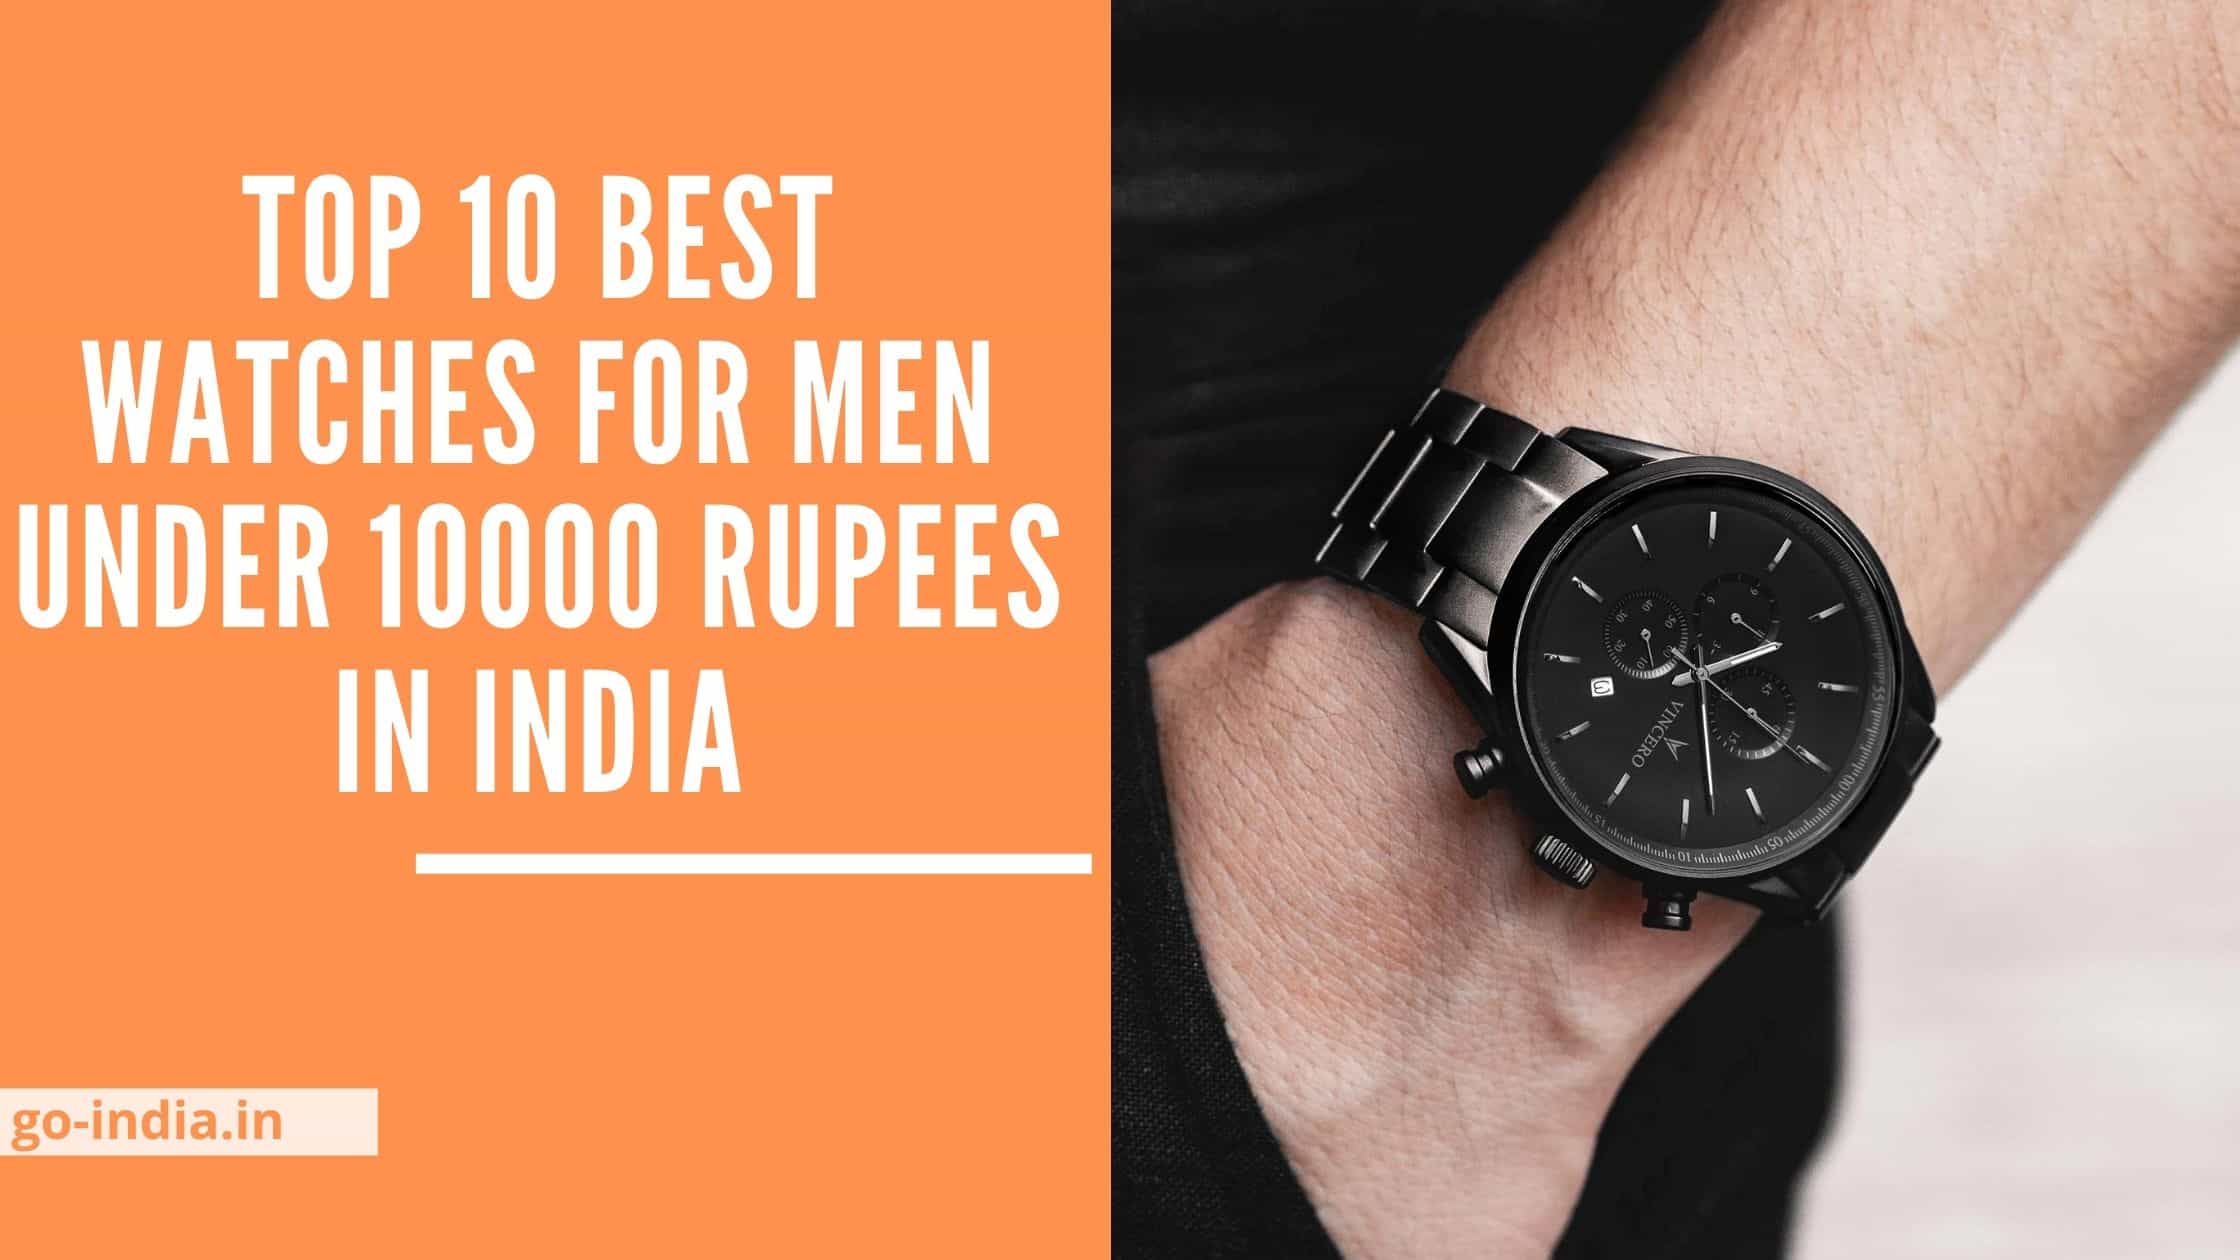 Top 10 Best Watches For Men Under 10000 Rupees in India